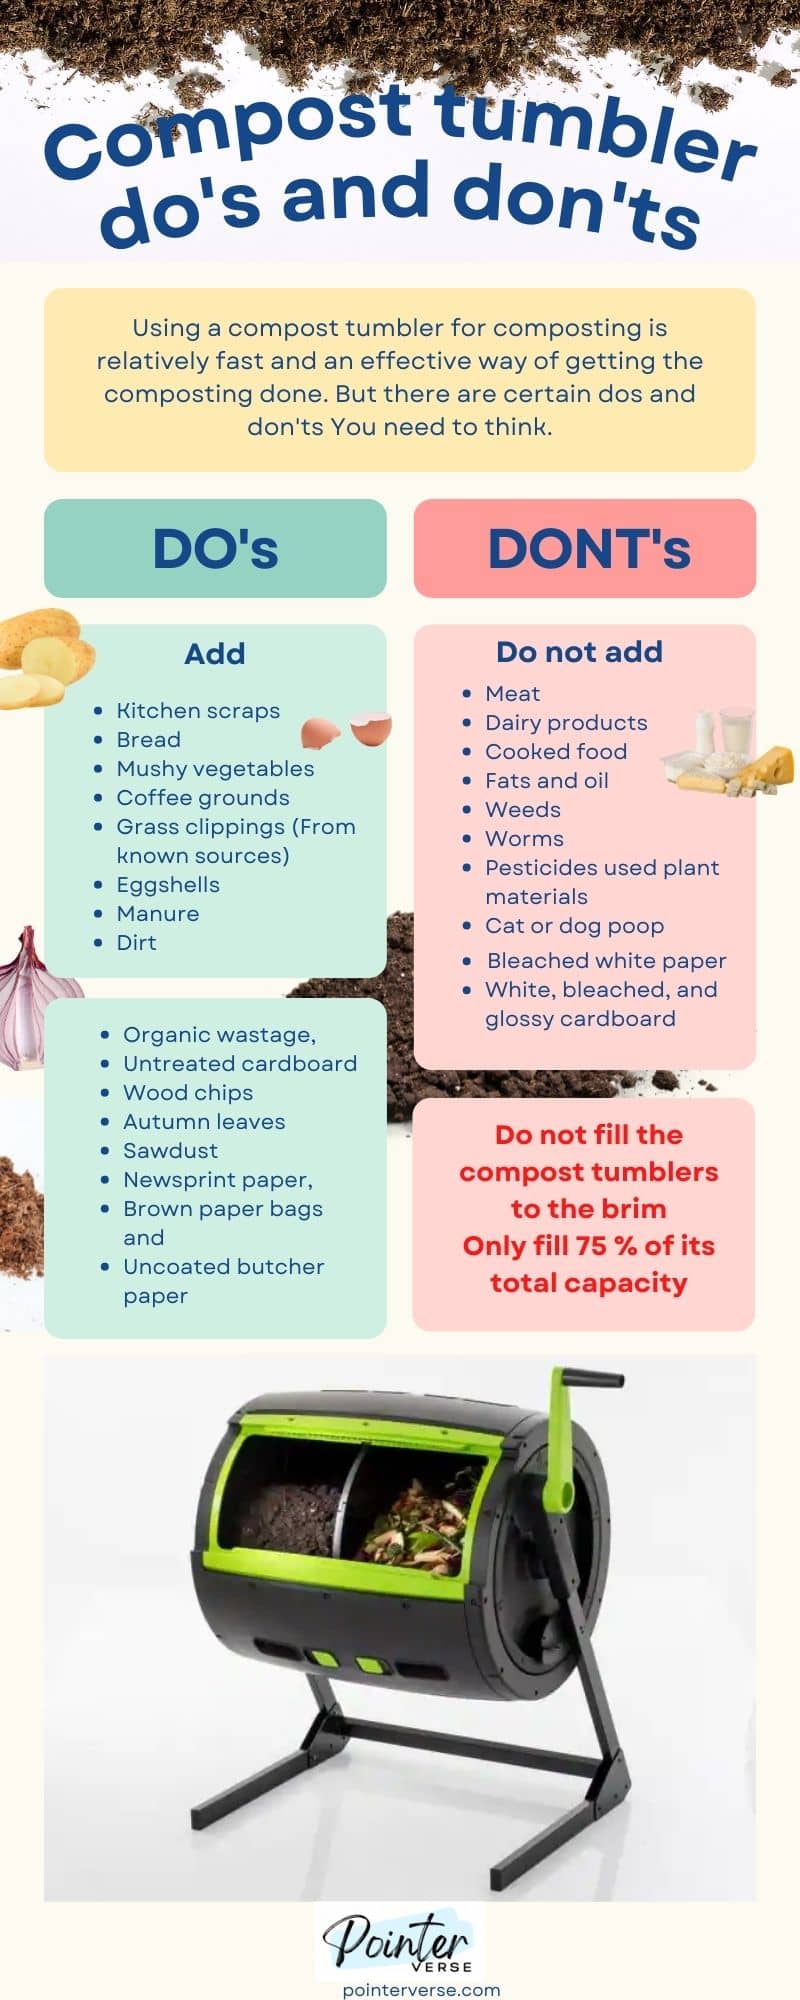 Compost tumbler do's and don'ts Infographic